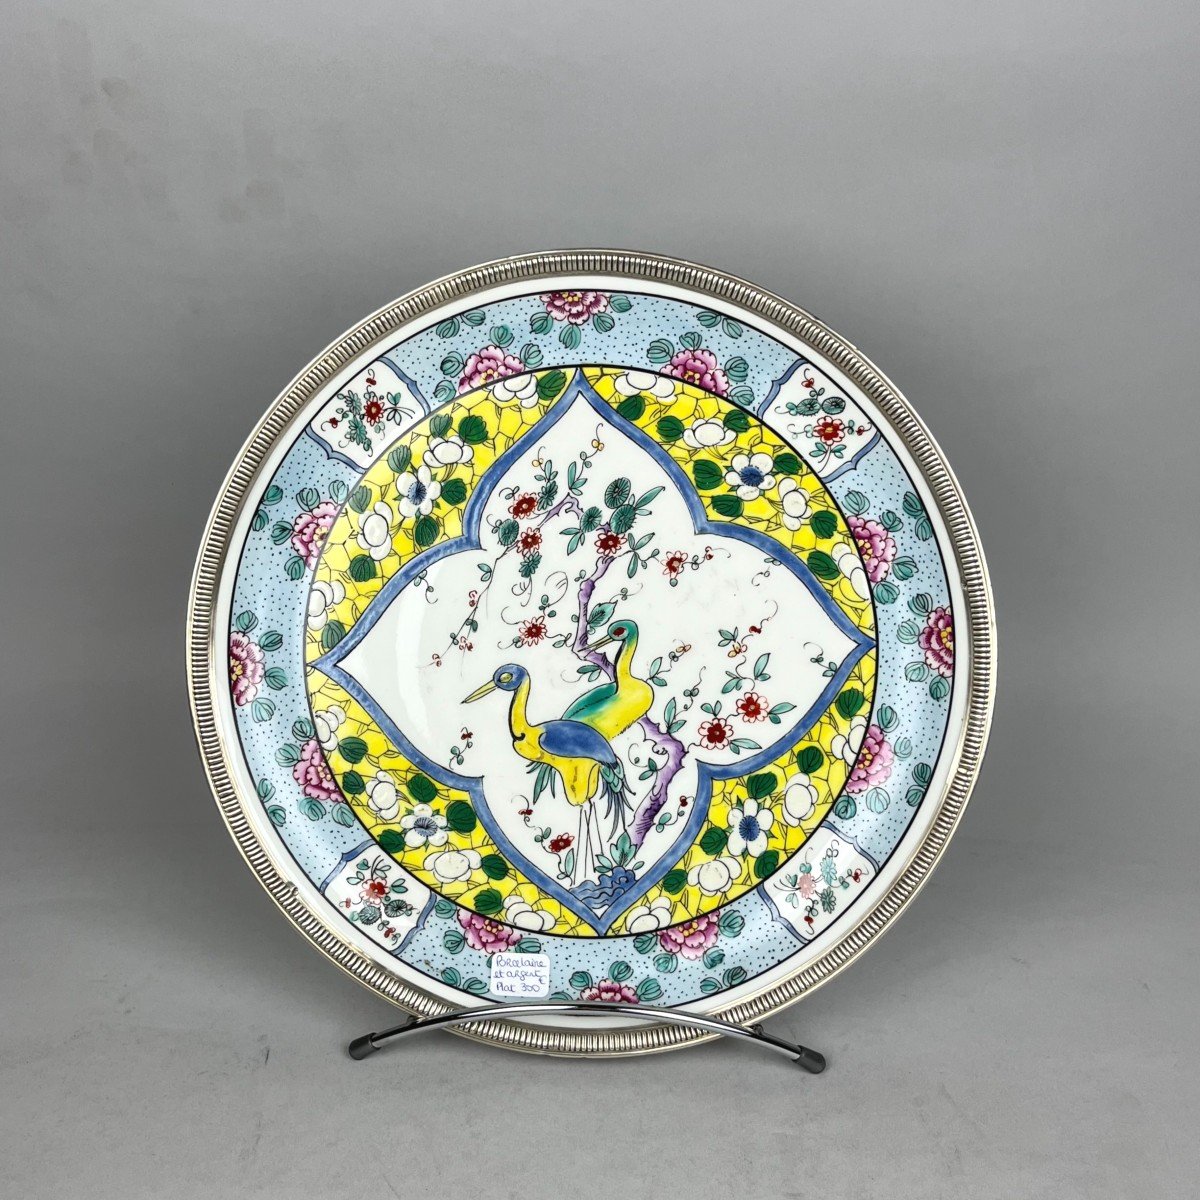 Porcelain And Sterling Silver Dish By Lagriffoul Et Laval In Paris.